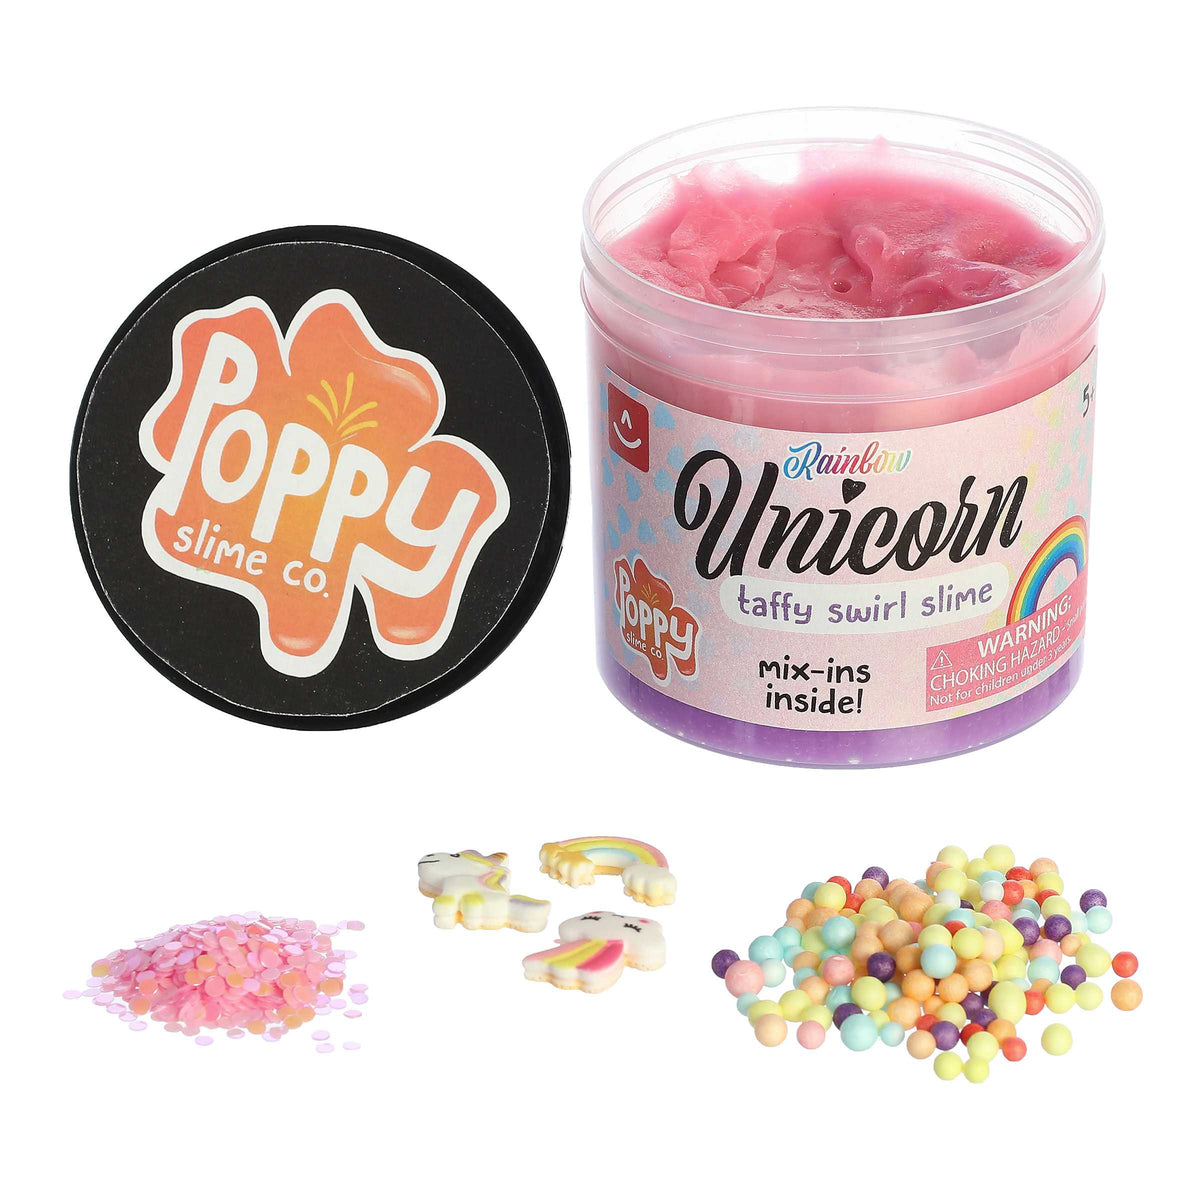 Magical Unicorn Rainbow Slime, approx. 11.3 oz, combines vibrant colors with unicorn and rainbow pieces